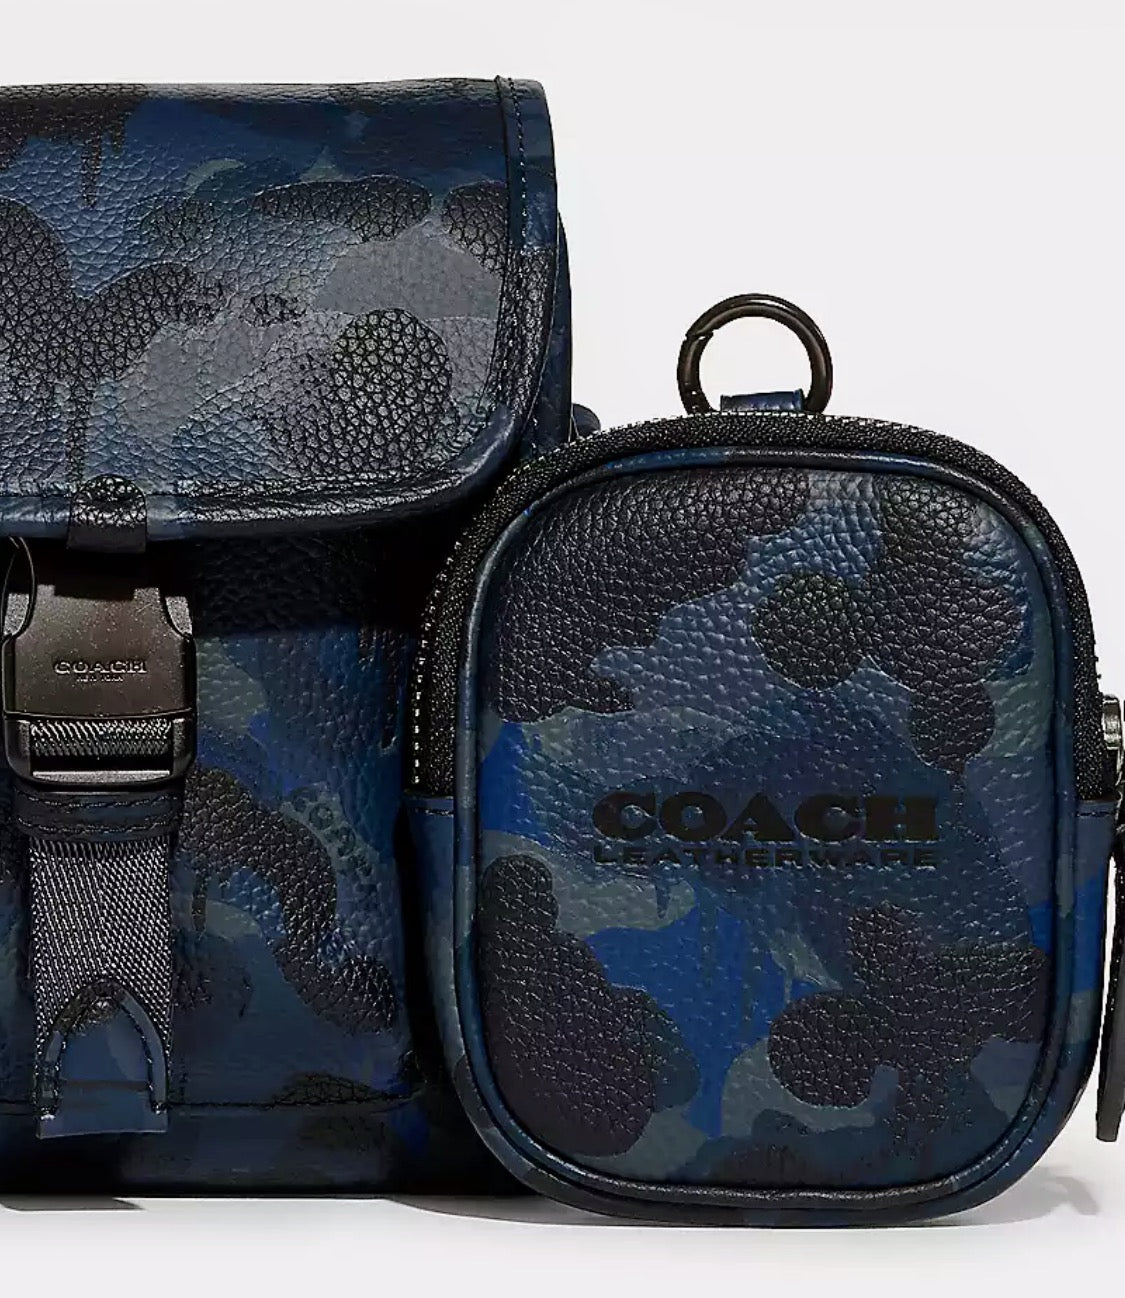 NWT COACH Charter North/South Crossbody With Hybrid Pouch With Camo Print